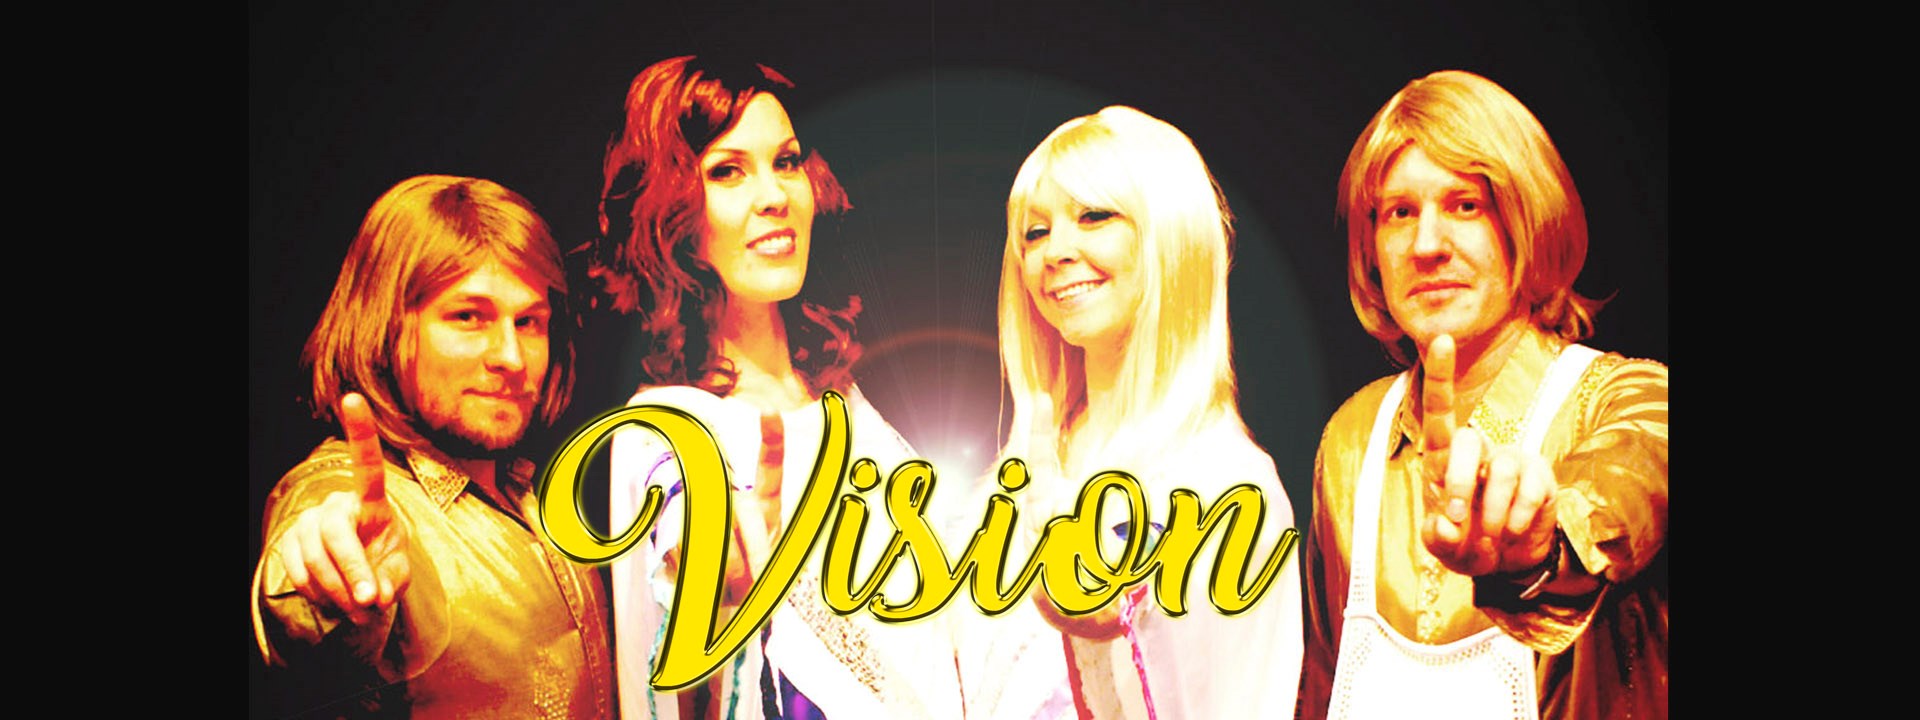 Vision - a tribute to ABBA